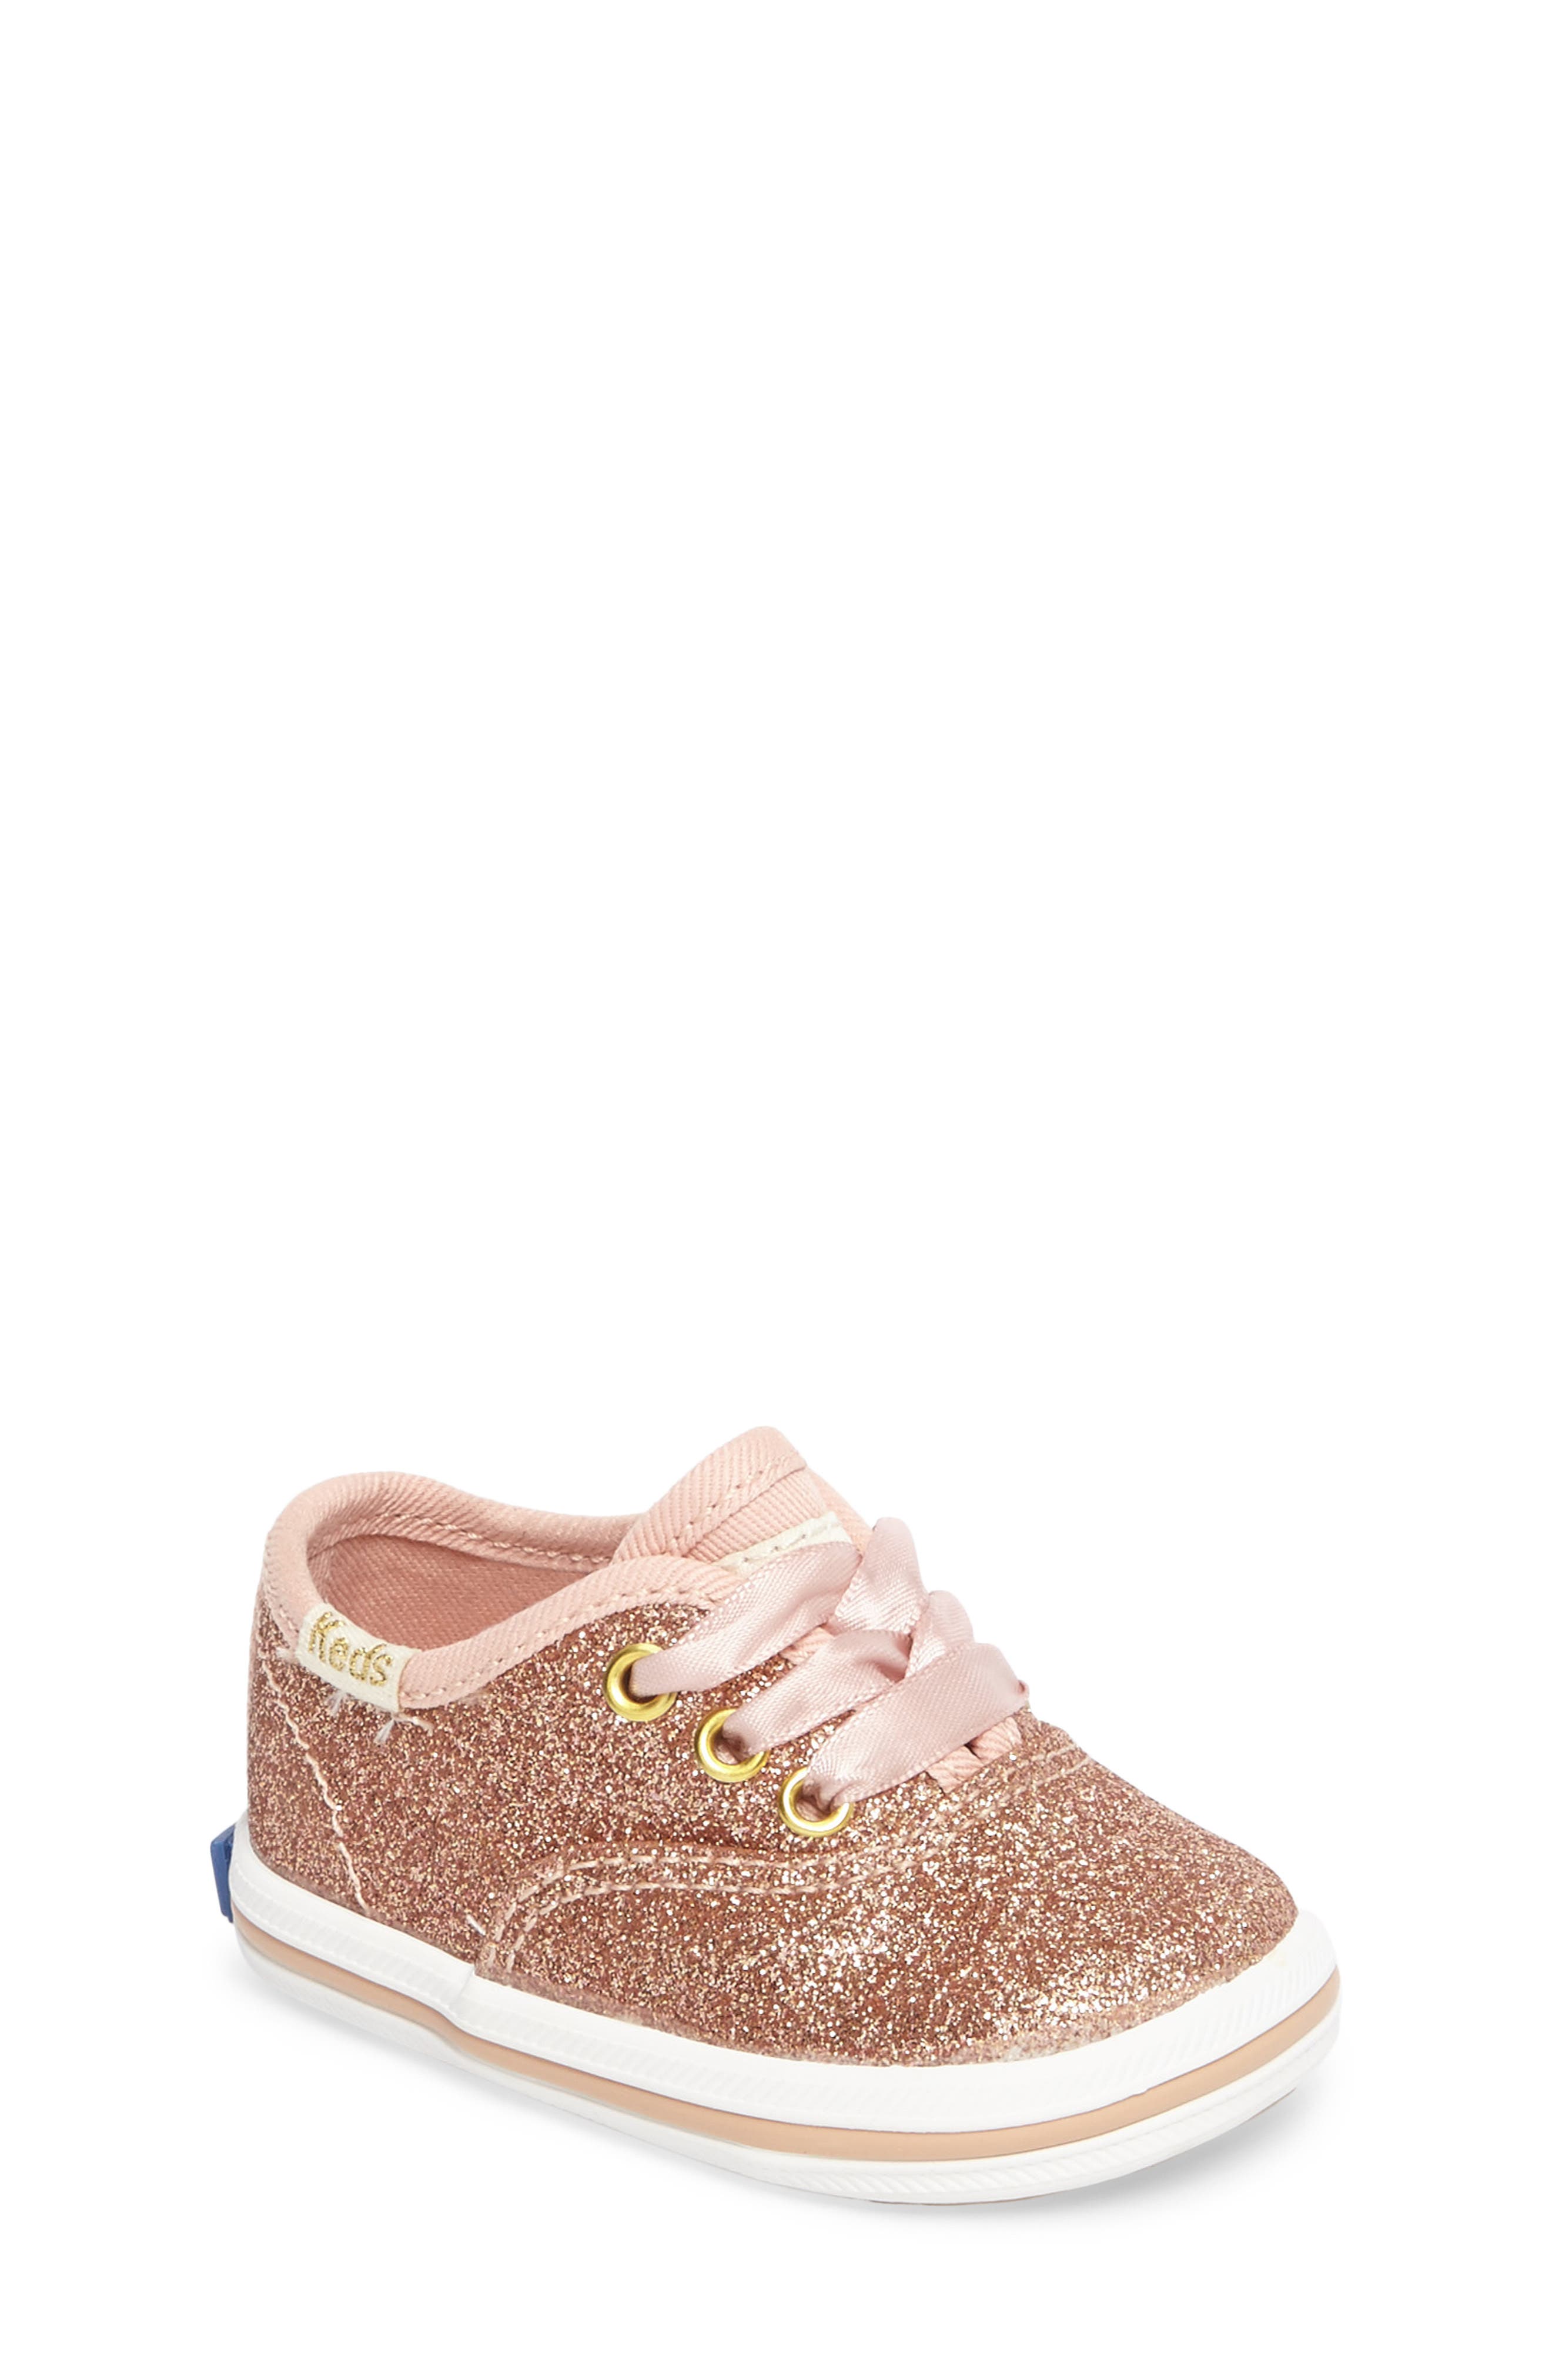 UPC 884401127289 product image for Keds(R) x kate spade new york Champion Glitter Crib Shoe in Rose Gold at  | upcitemdb.com